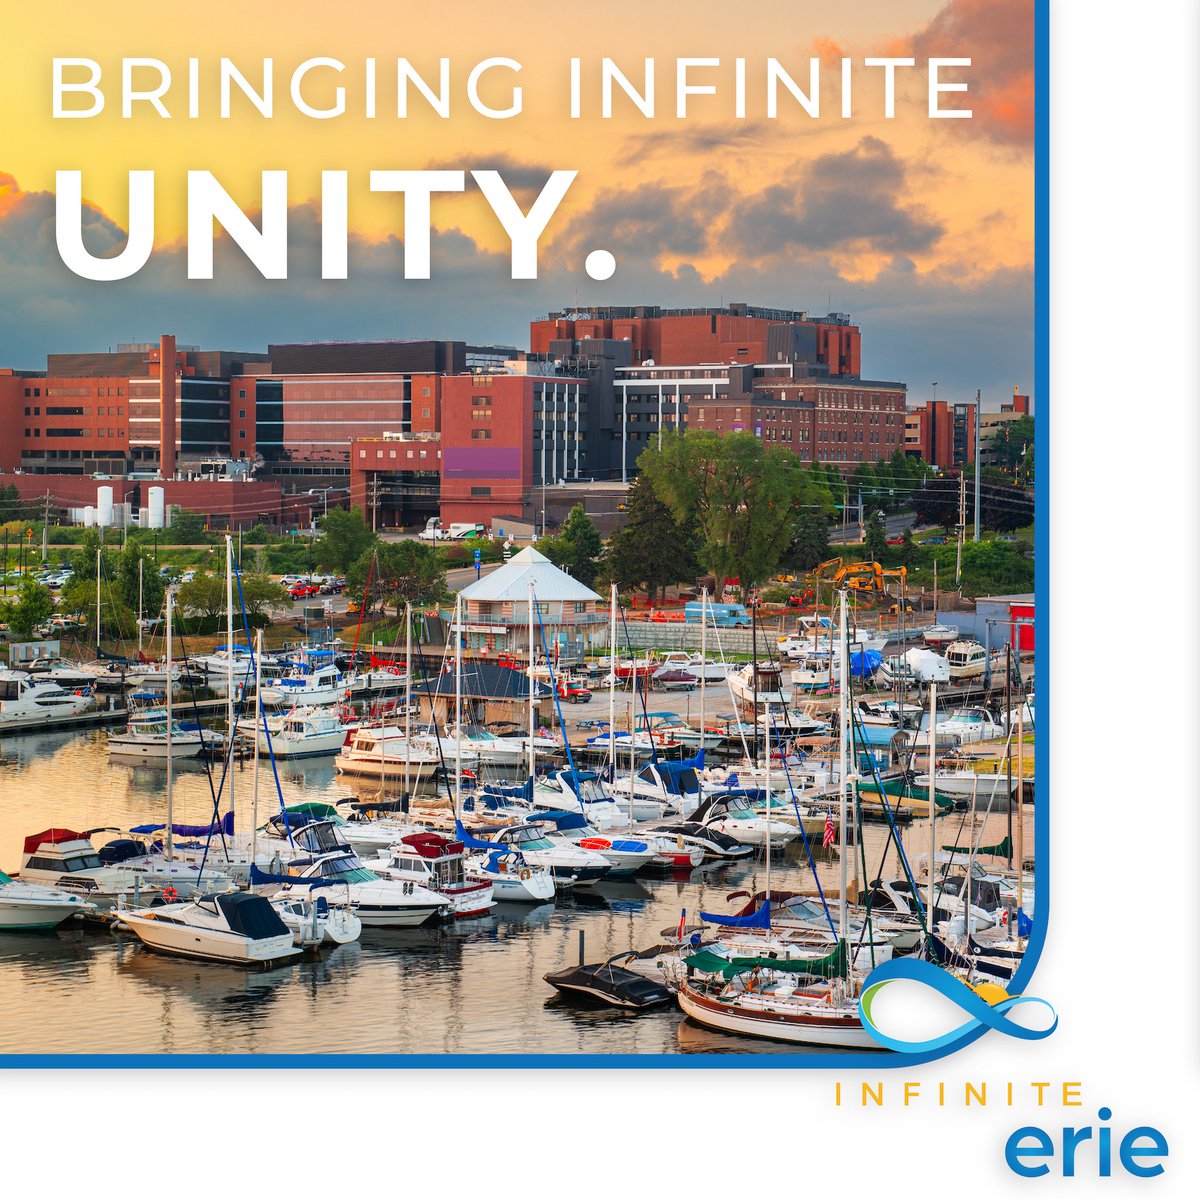 #InfiniteErie is powered by the #ErieActionTeam, which unites eight leaders driving Erie’s economic and community development efforts. #WePutPlansIntoAction #EriePA

@erie_insurance @TheECF1935 @ECGRA814 @DiverseErie @JeffersonErie @CountyofErie @CityofEriePA @EriePAChamber